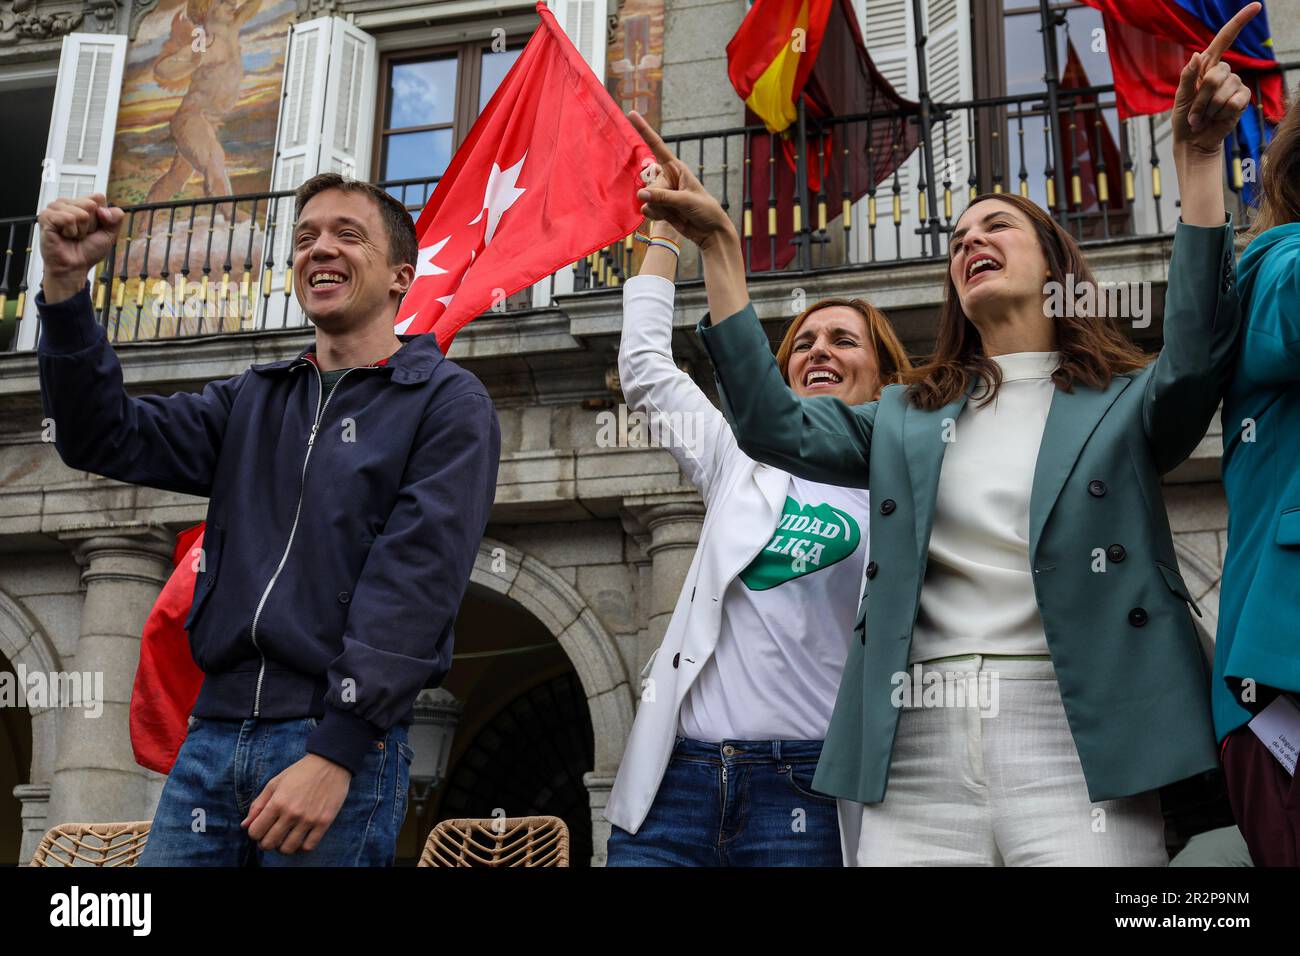 Monica Garcia (C), candidate for the presidency of the Community of Madrid in the elections on May 28, Rita Maestre (R), candidate for mayor of the Spanish capital for the Mas Madrid party (R) and Iñigo Errejón ( L) deputy of the Cortes for the Mas Pais party greet those present from the scene of the political act. The left-wing political party, Mas Madrid, held a rally in the Plaza Mayor in Madrid. At the rally, Mónica García, candidate for president of the Madrid community, presented her political program to her supporters. Among others, they have accompanied her, Iñigo Errejón deputy of the Stock Photo